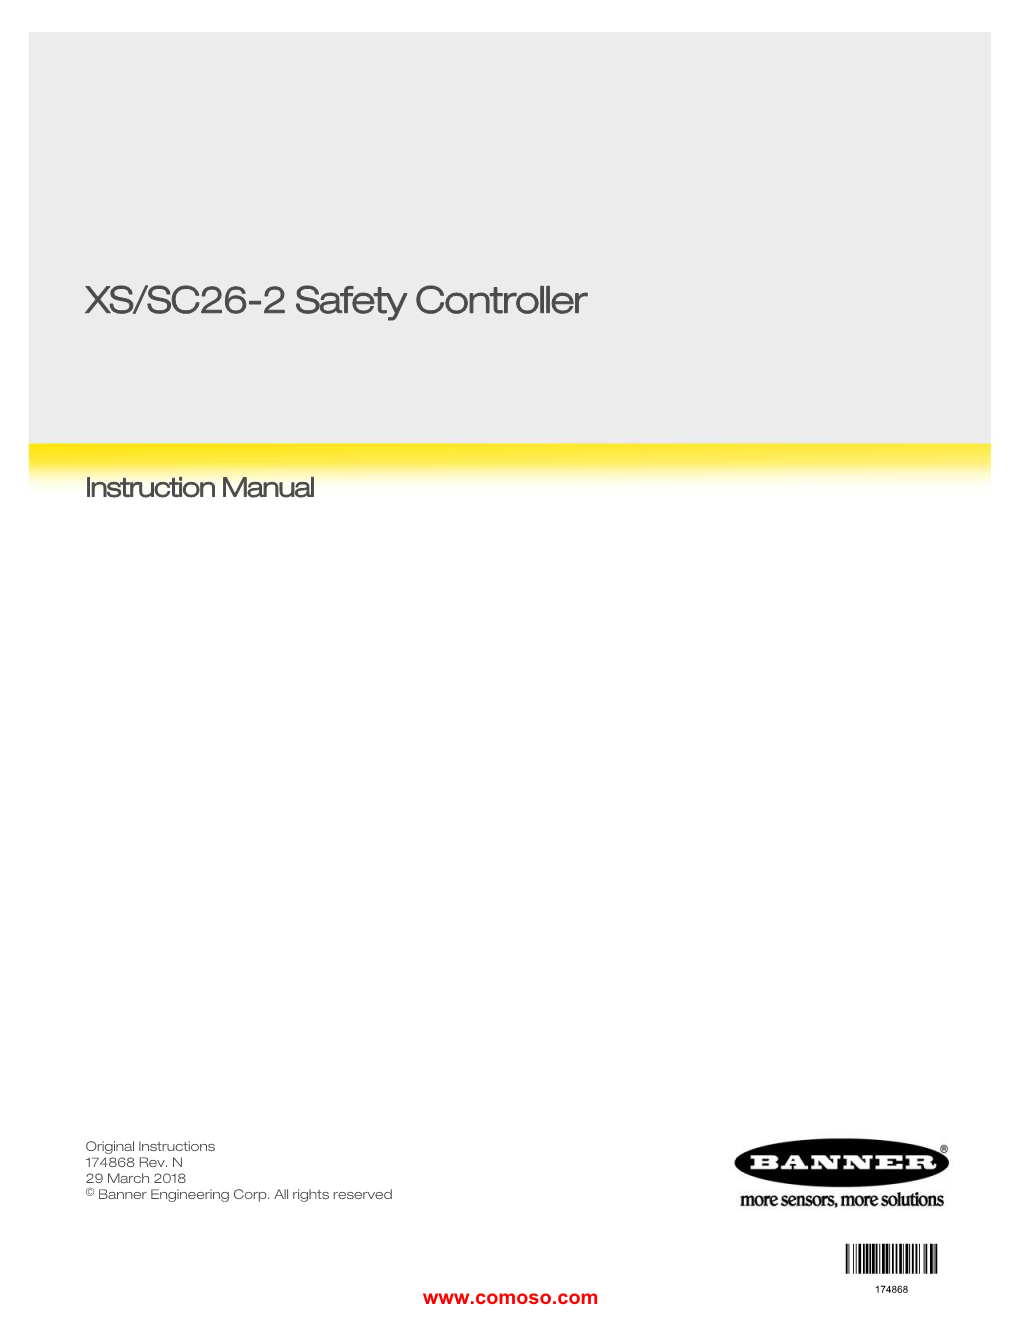 XS/SC26-2 Safety Controller Instruction Manual